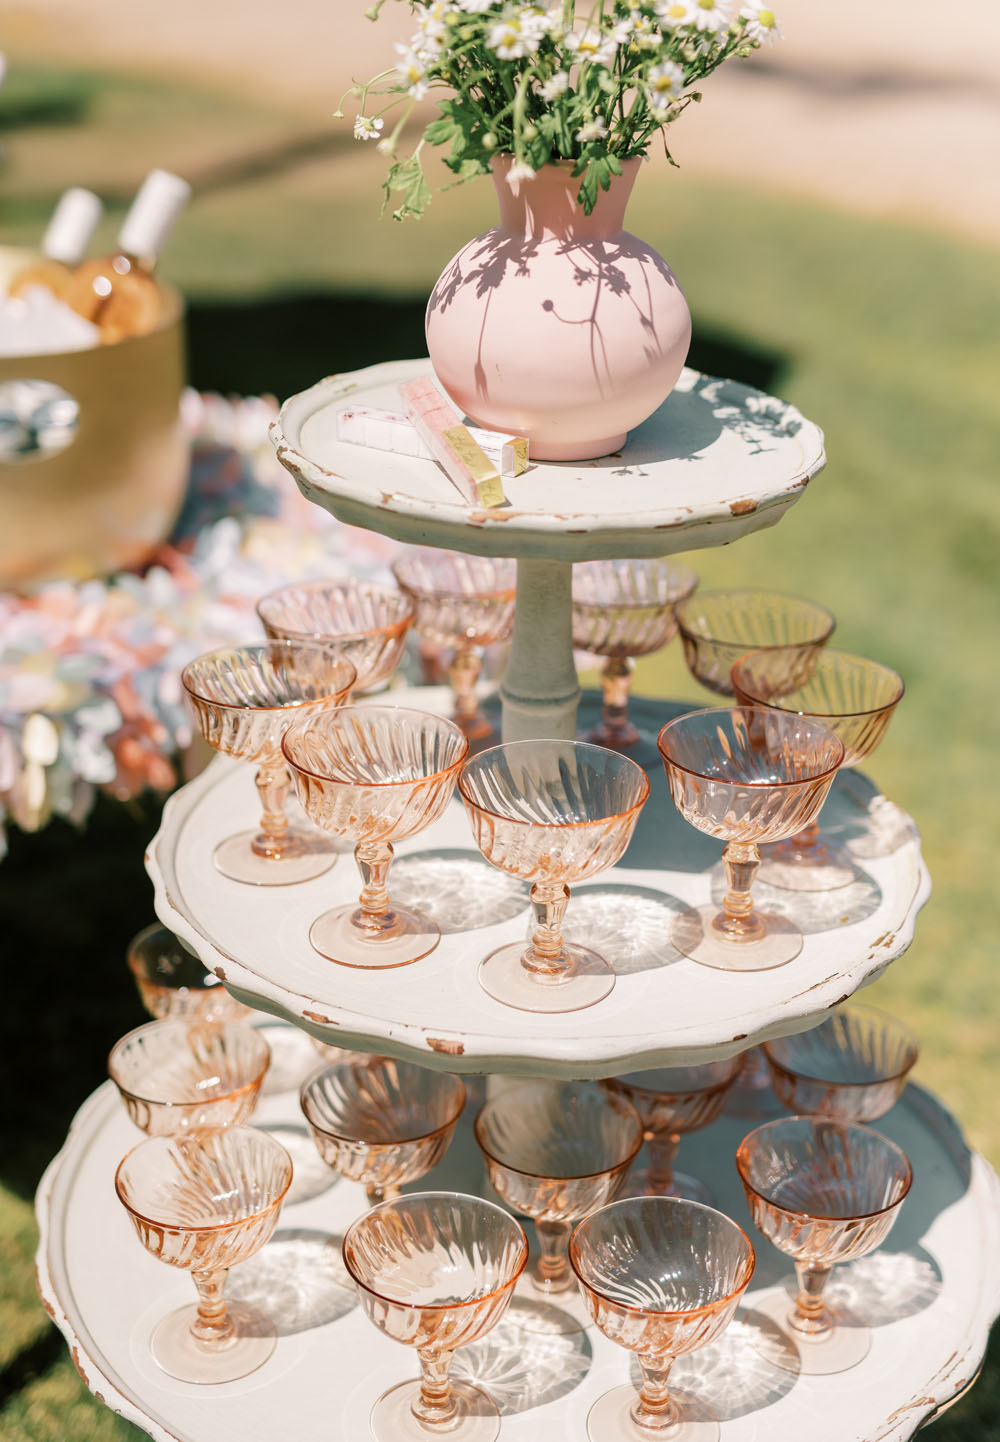 English tea party inspired bridal shower